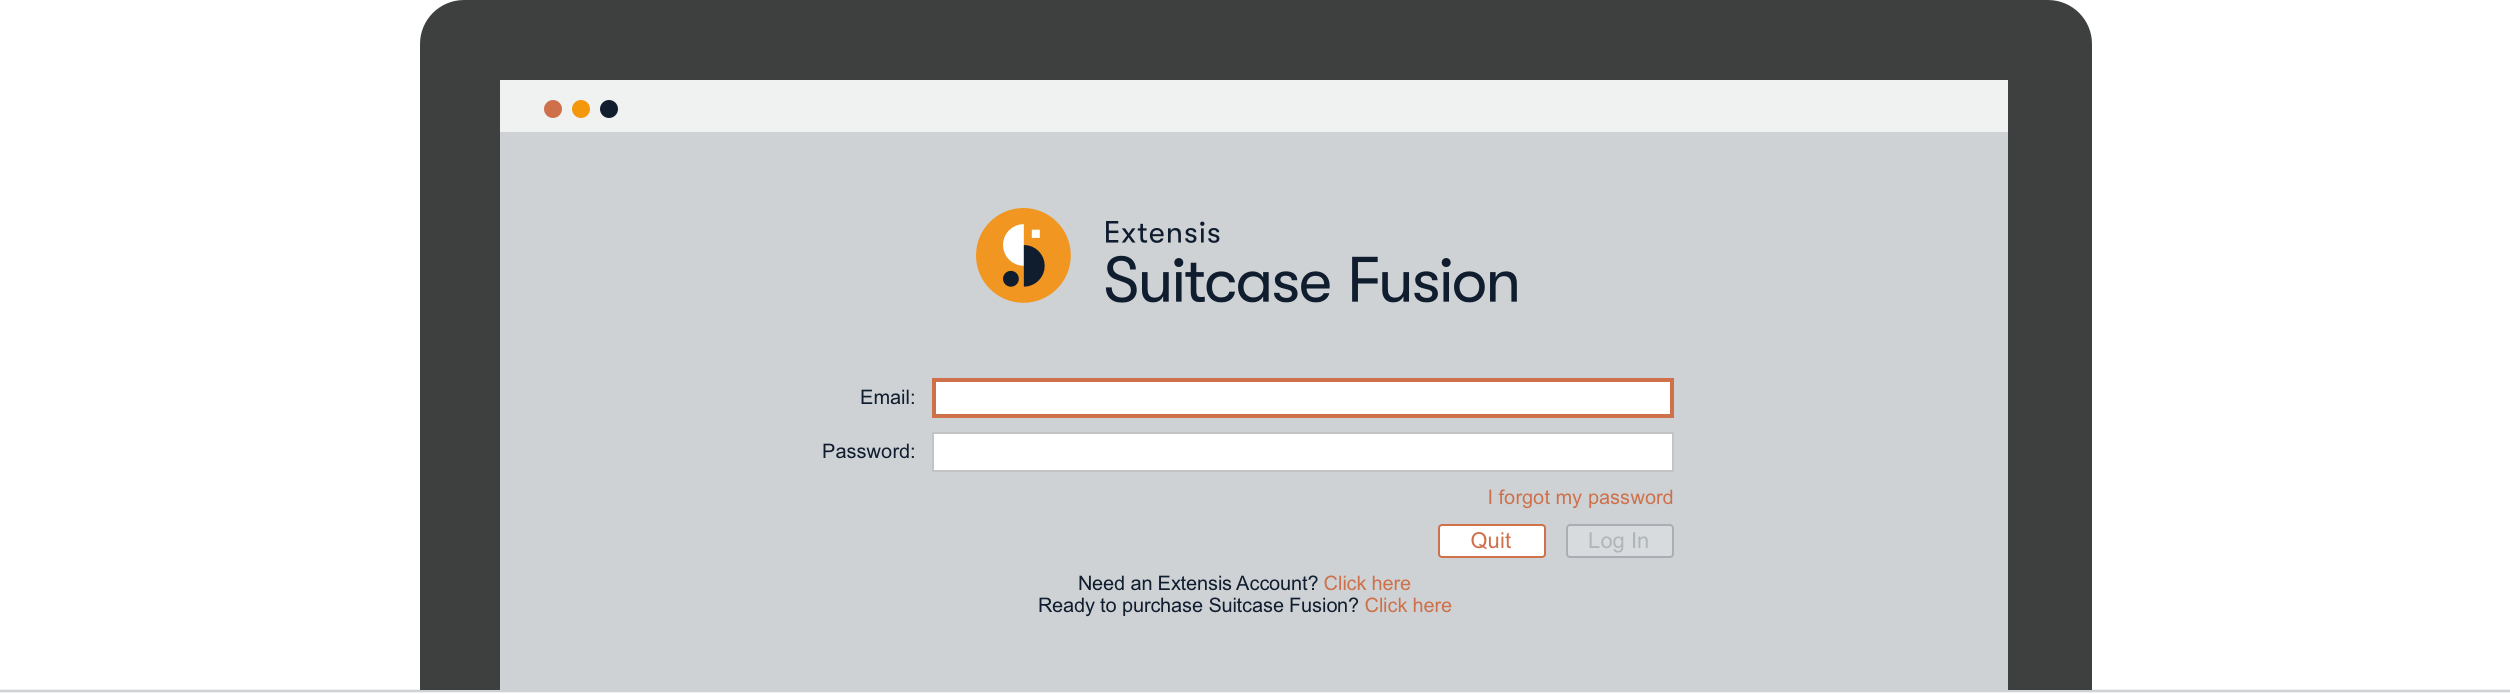 suitcase fusion 6 gets stuck on preparing